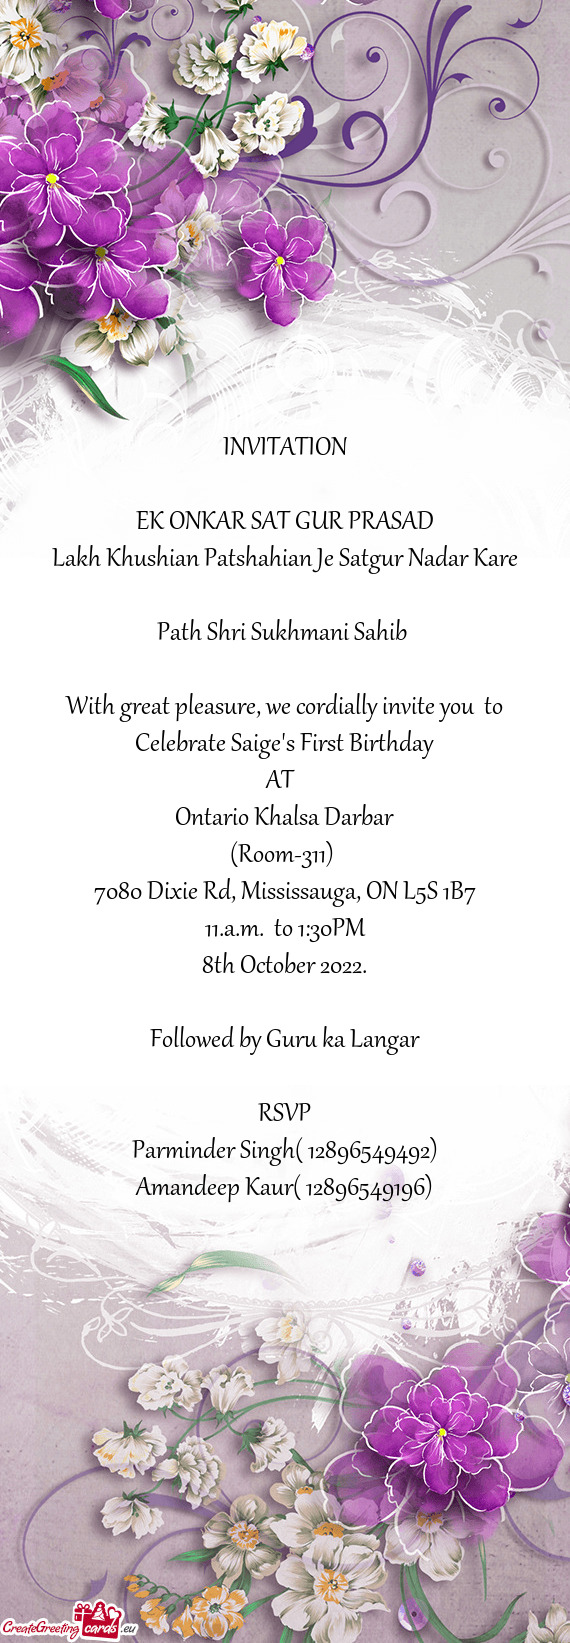 With great pleasure, we cordially invite you to Celebrate Saige